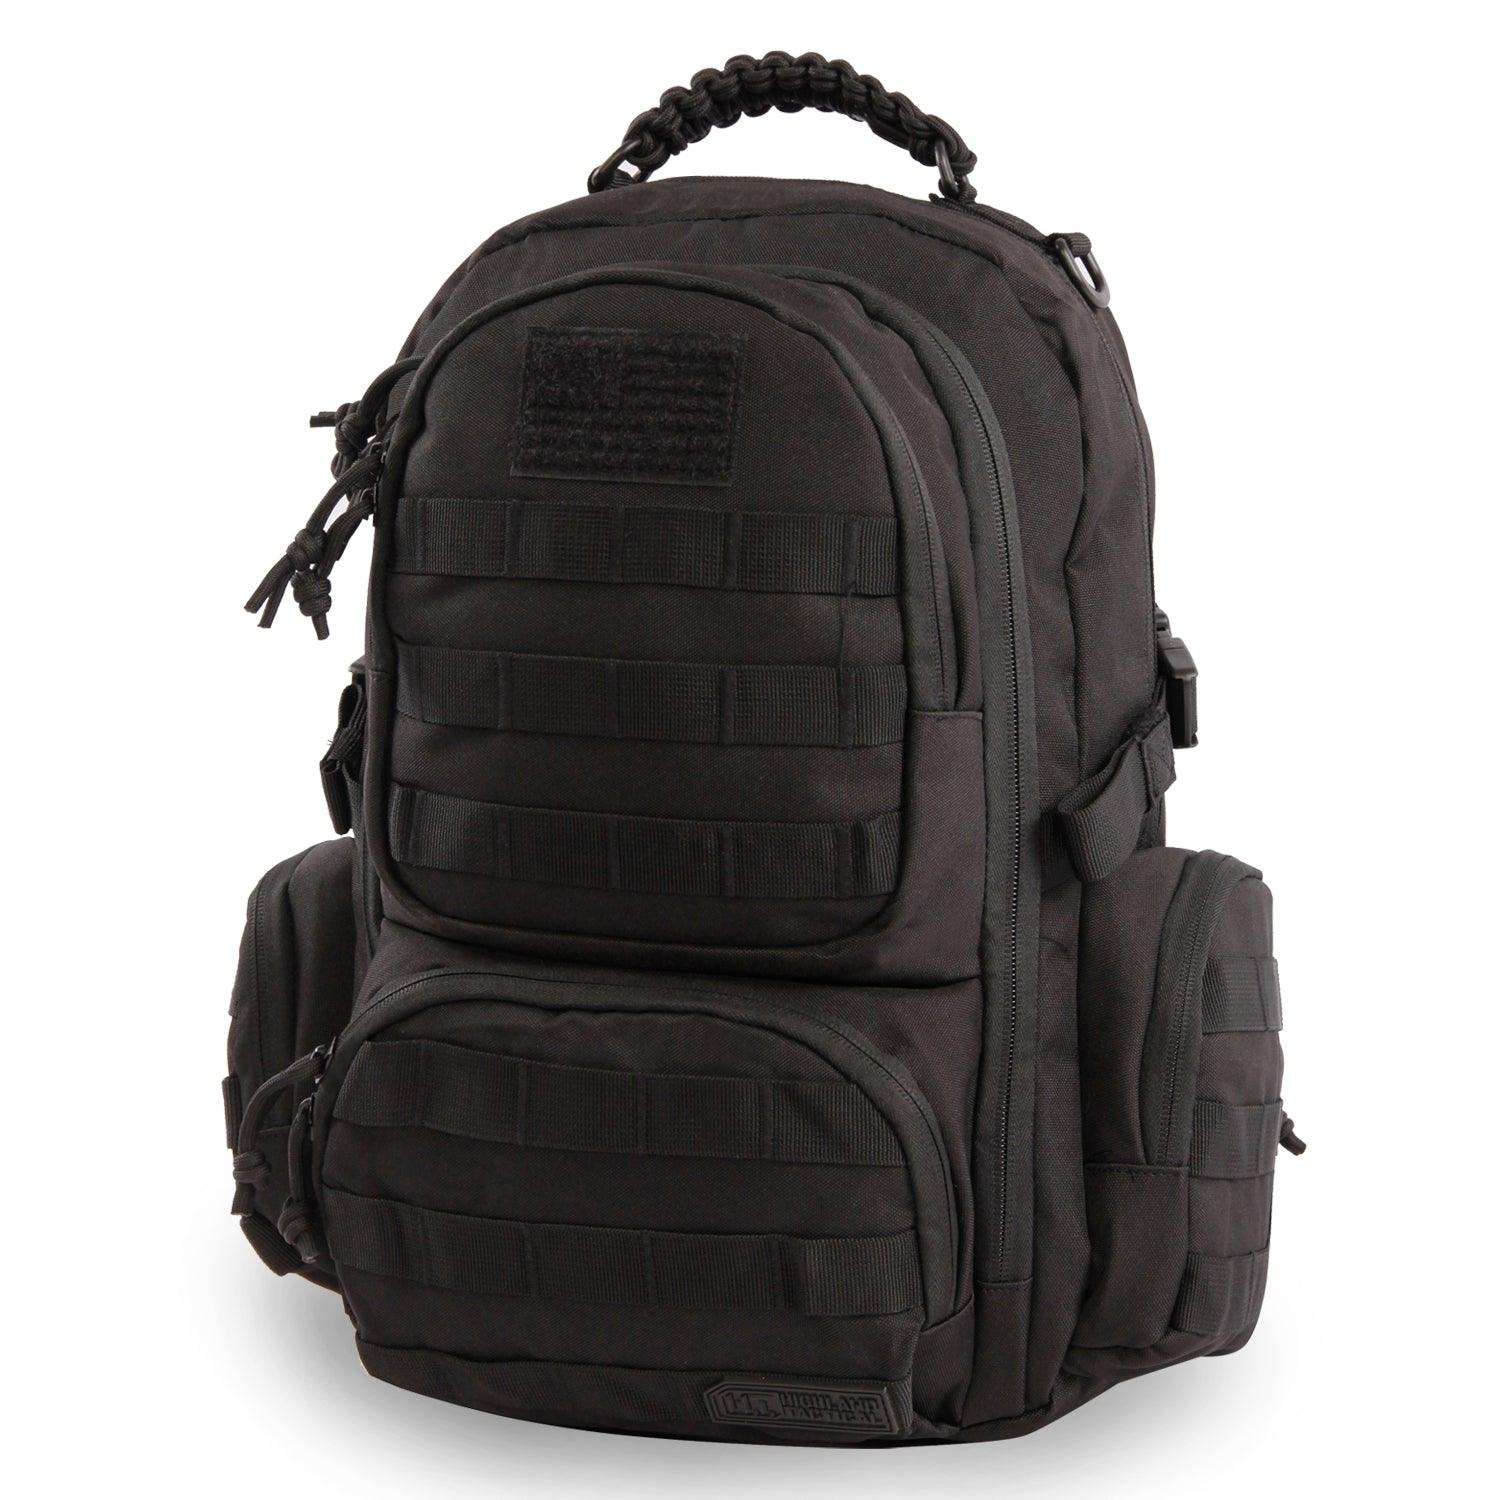 West Tactical Backpack | Hiking | Military | Outdoor bag